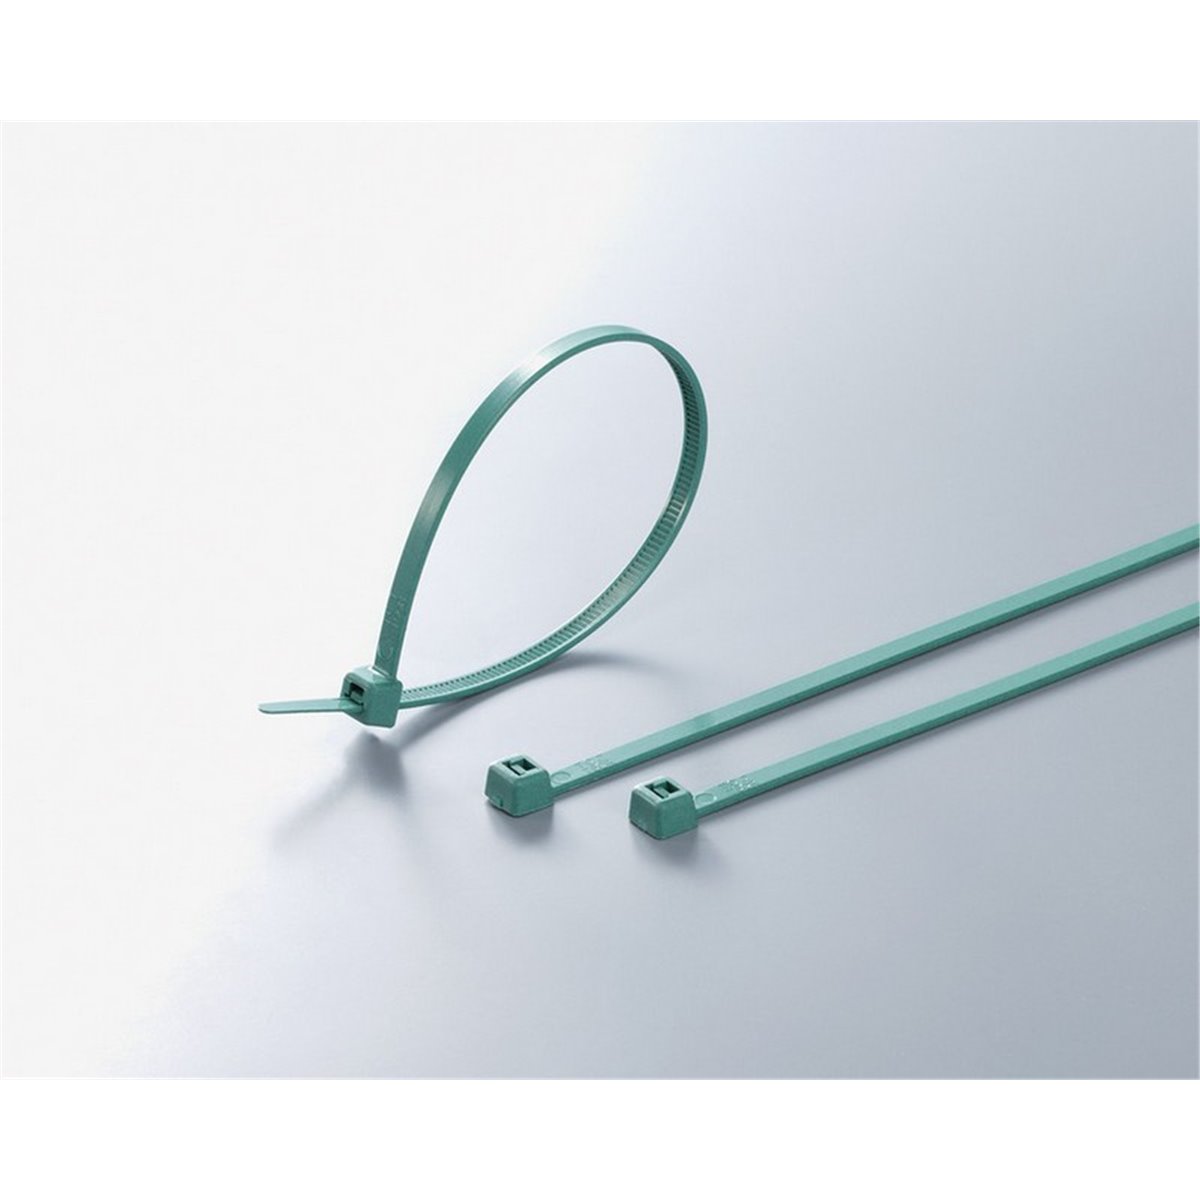 Cable tie, detectable MCTS150-PA66MP+-GN, 3.5x153mm, green, 100 pcs. HellermannTyton